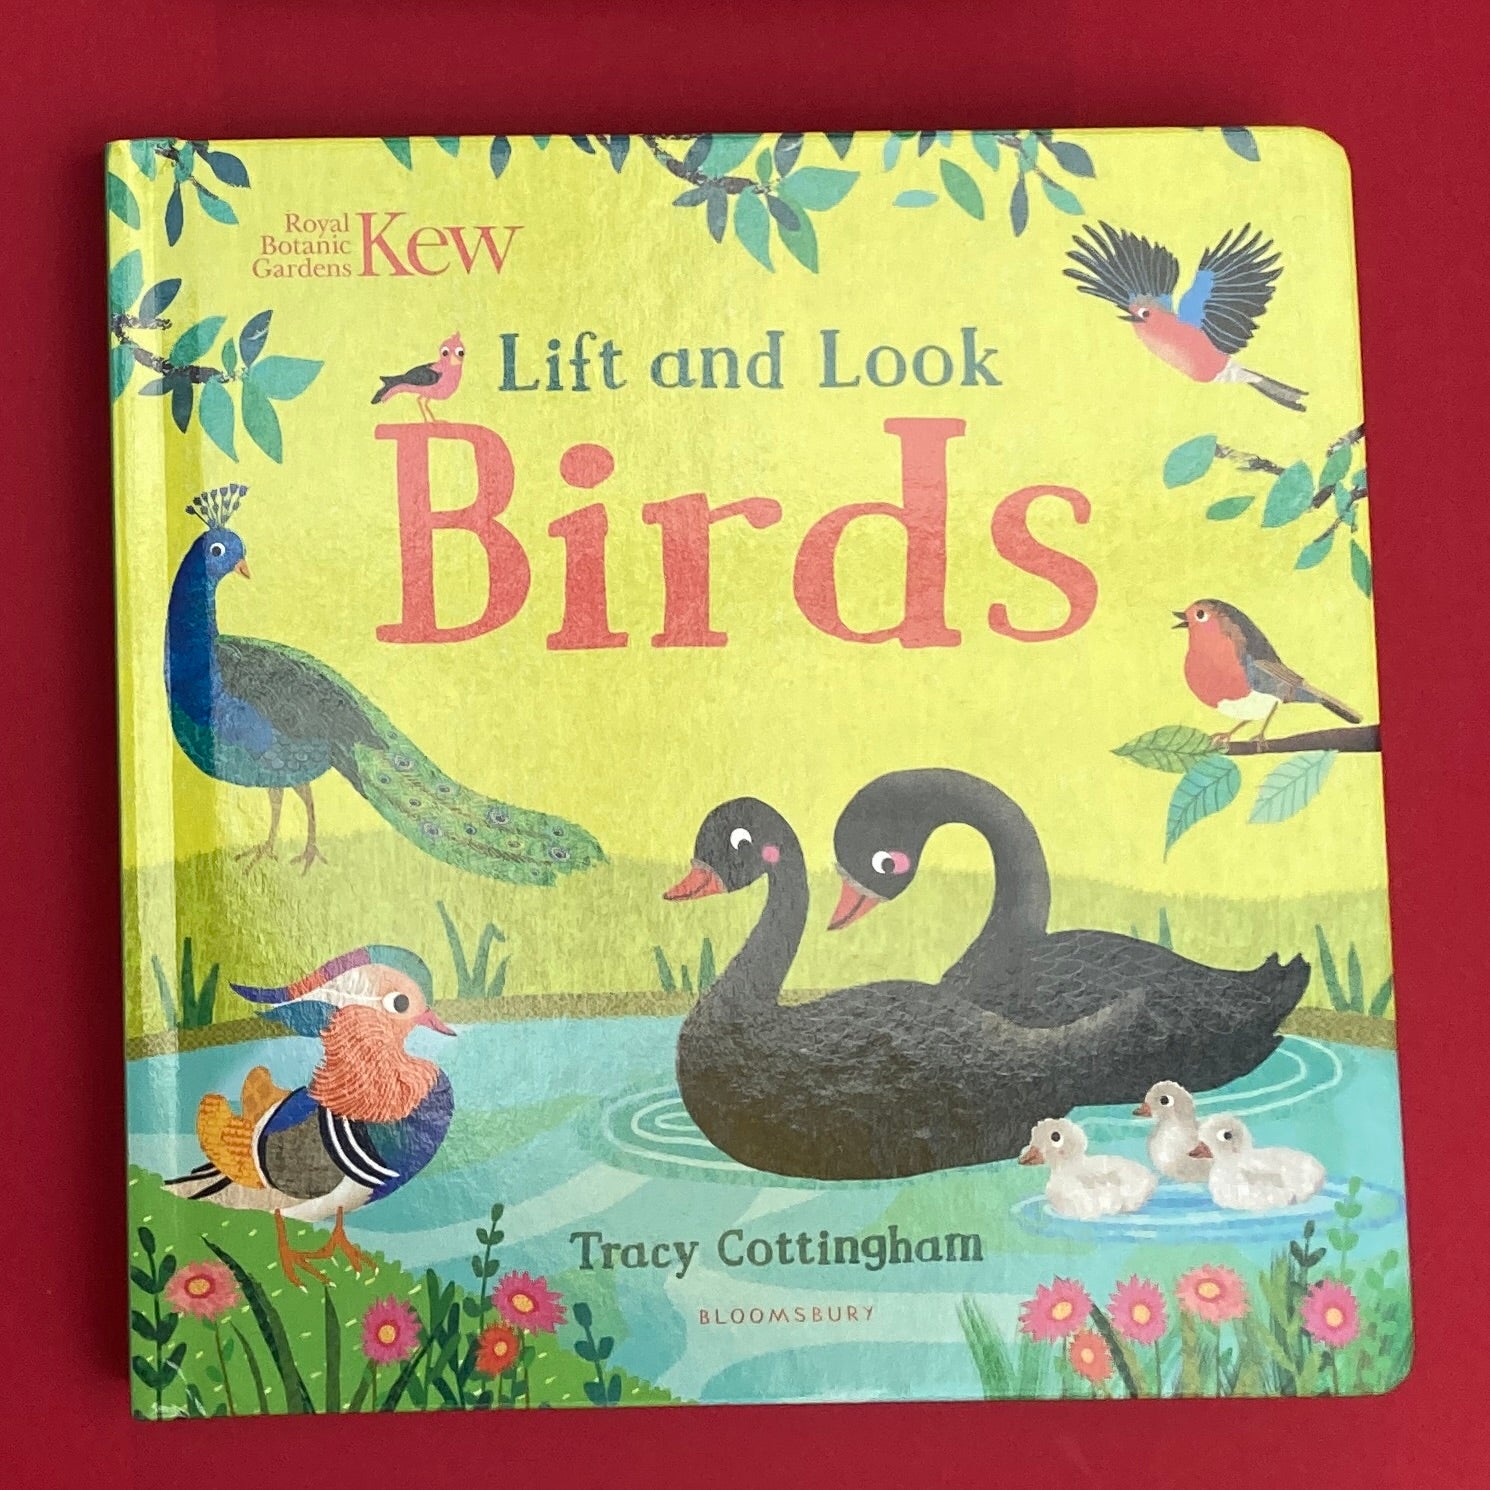 Lift and Look: Birds by Tracy Cottingham